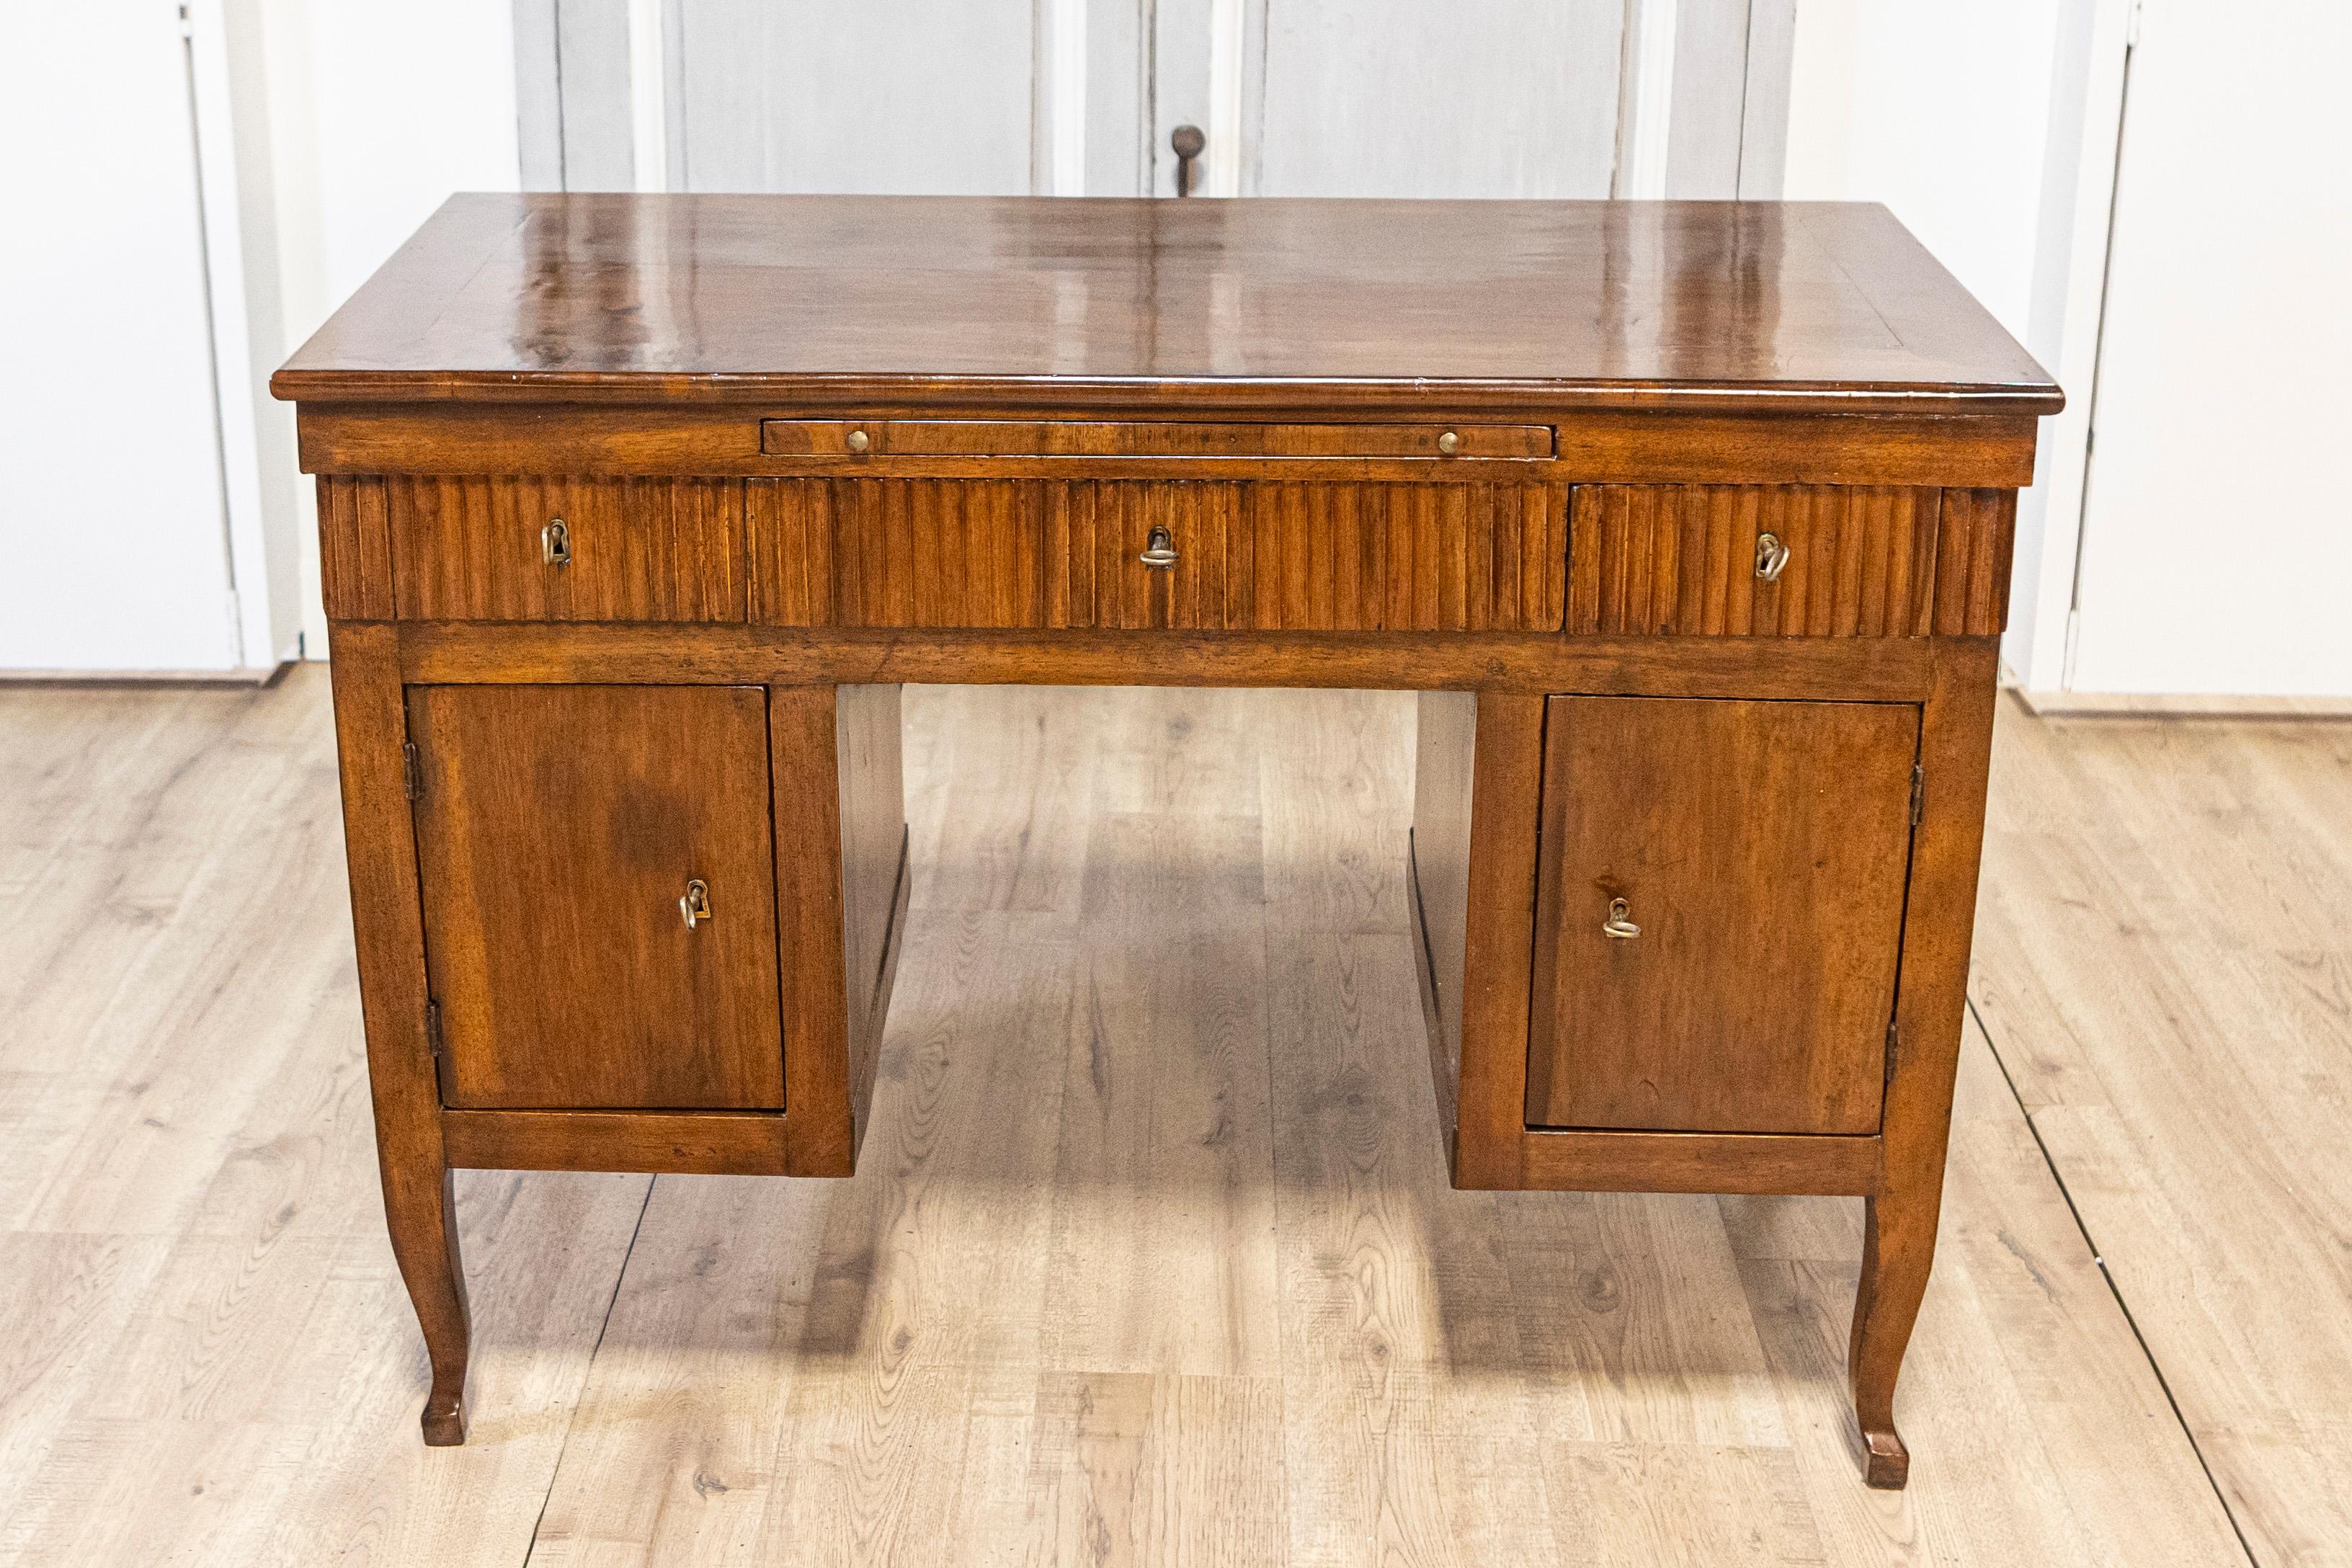 Italian 18th Century Walnut Desk with Carved Reeded Apron, Drawers and Doors In Good Condition For Sale In Atlanta, GA